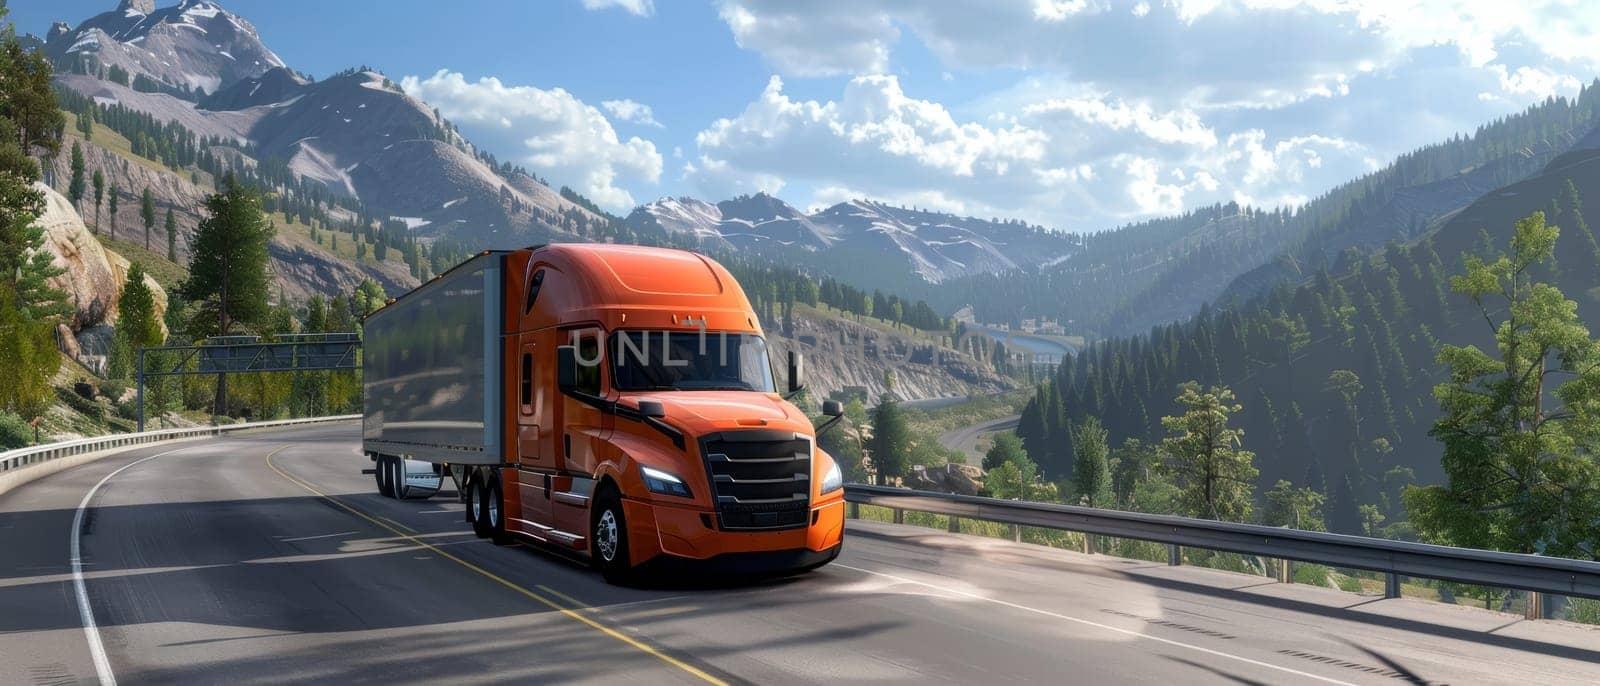 An orange semi truck with trailer travels on a highway winding through a scenic mountain landscape under a clear sky. by sfinks